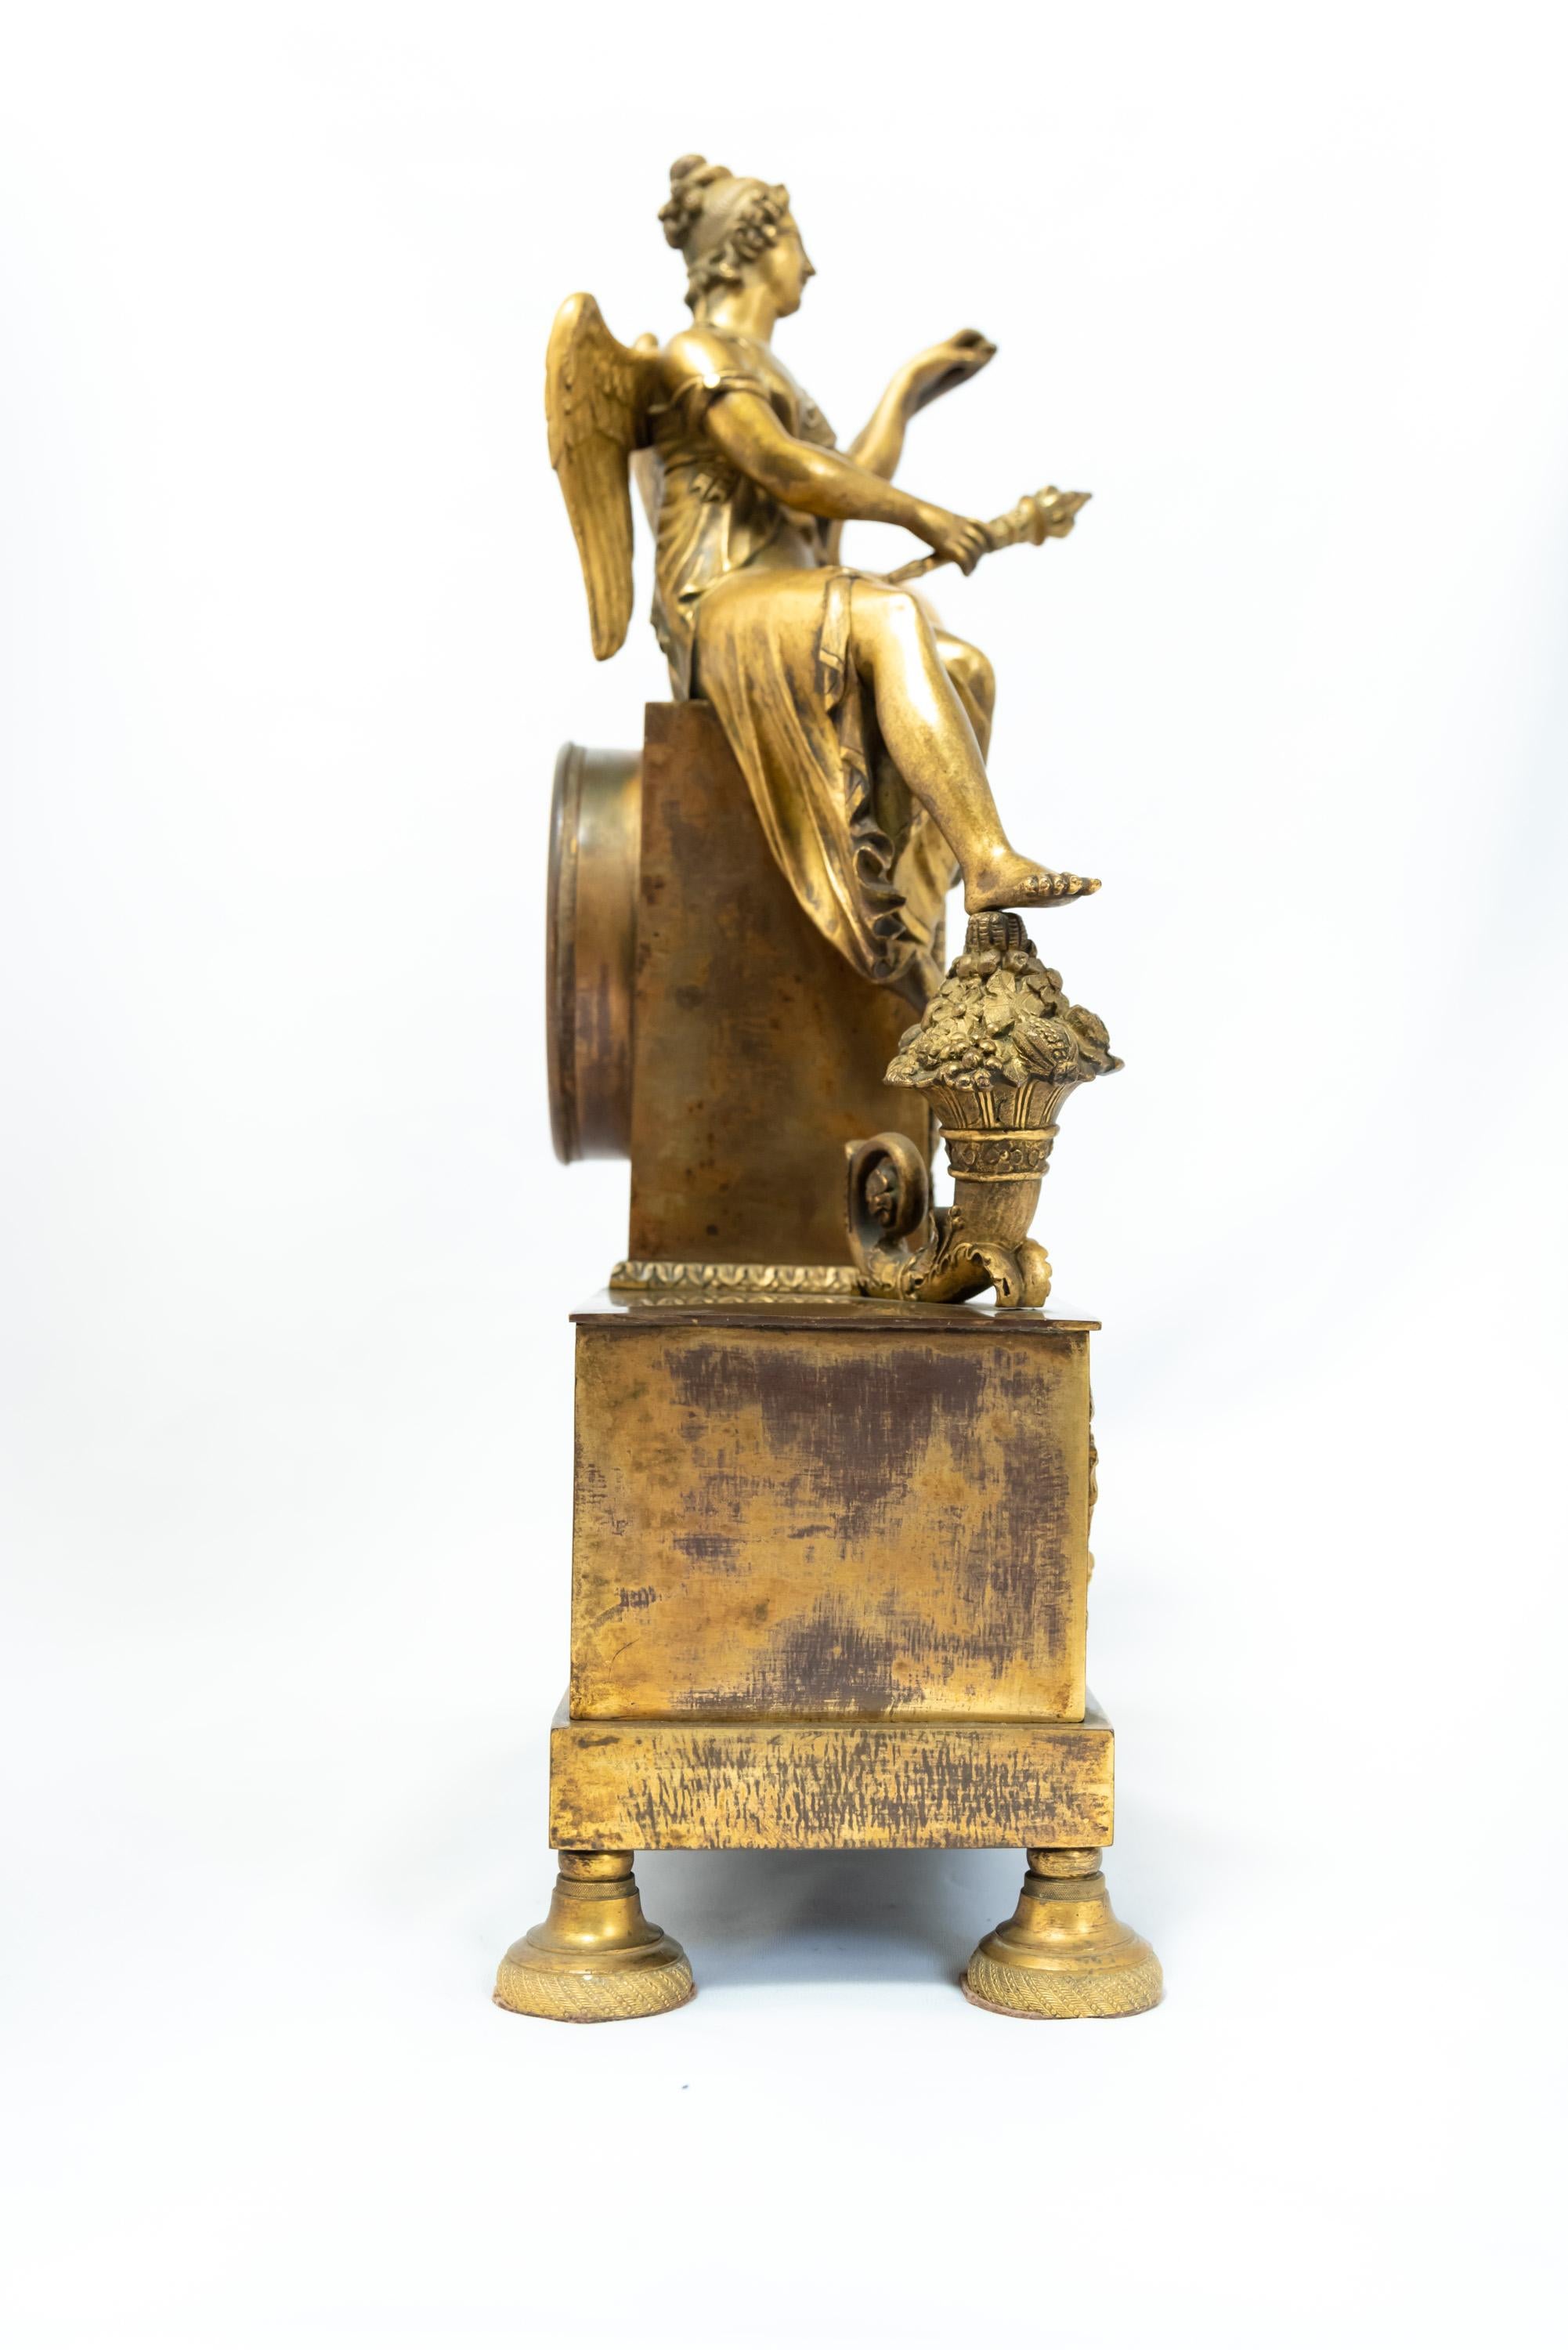 A French fire-gilt clock depicting a seated female figure - Urania, I presume, judging from the iconography. Empire Era, 1800-1815. The gilding shows signs of wear, and the silvered silk-thread mechanism is in unverified condition.